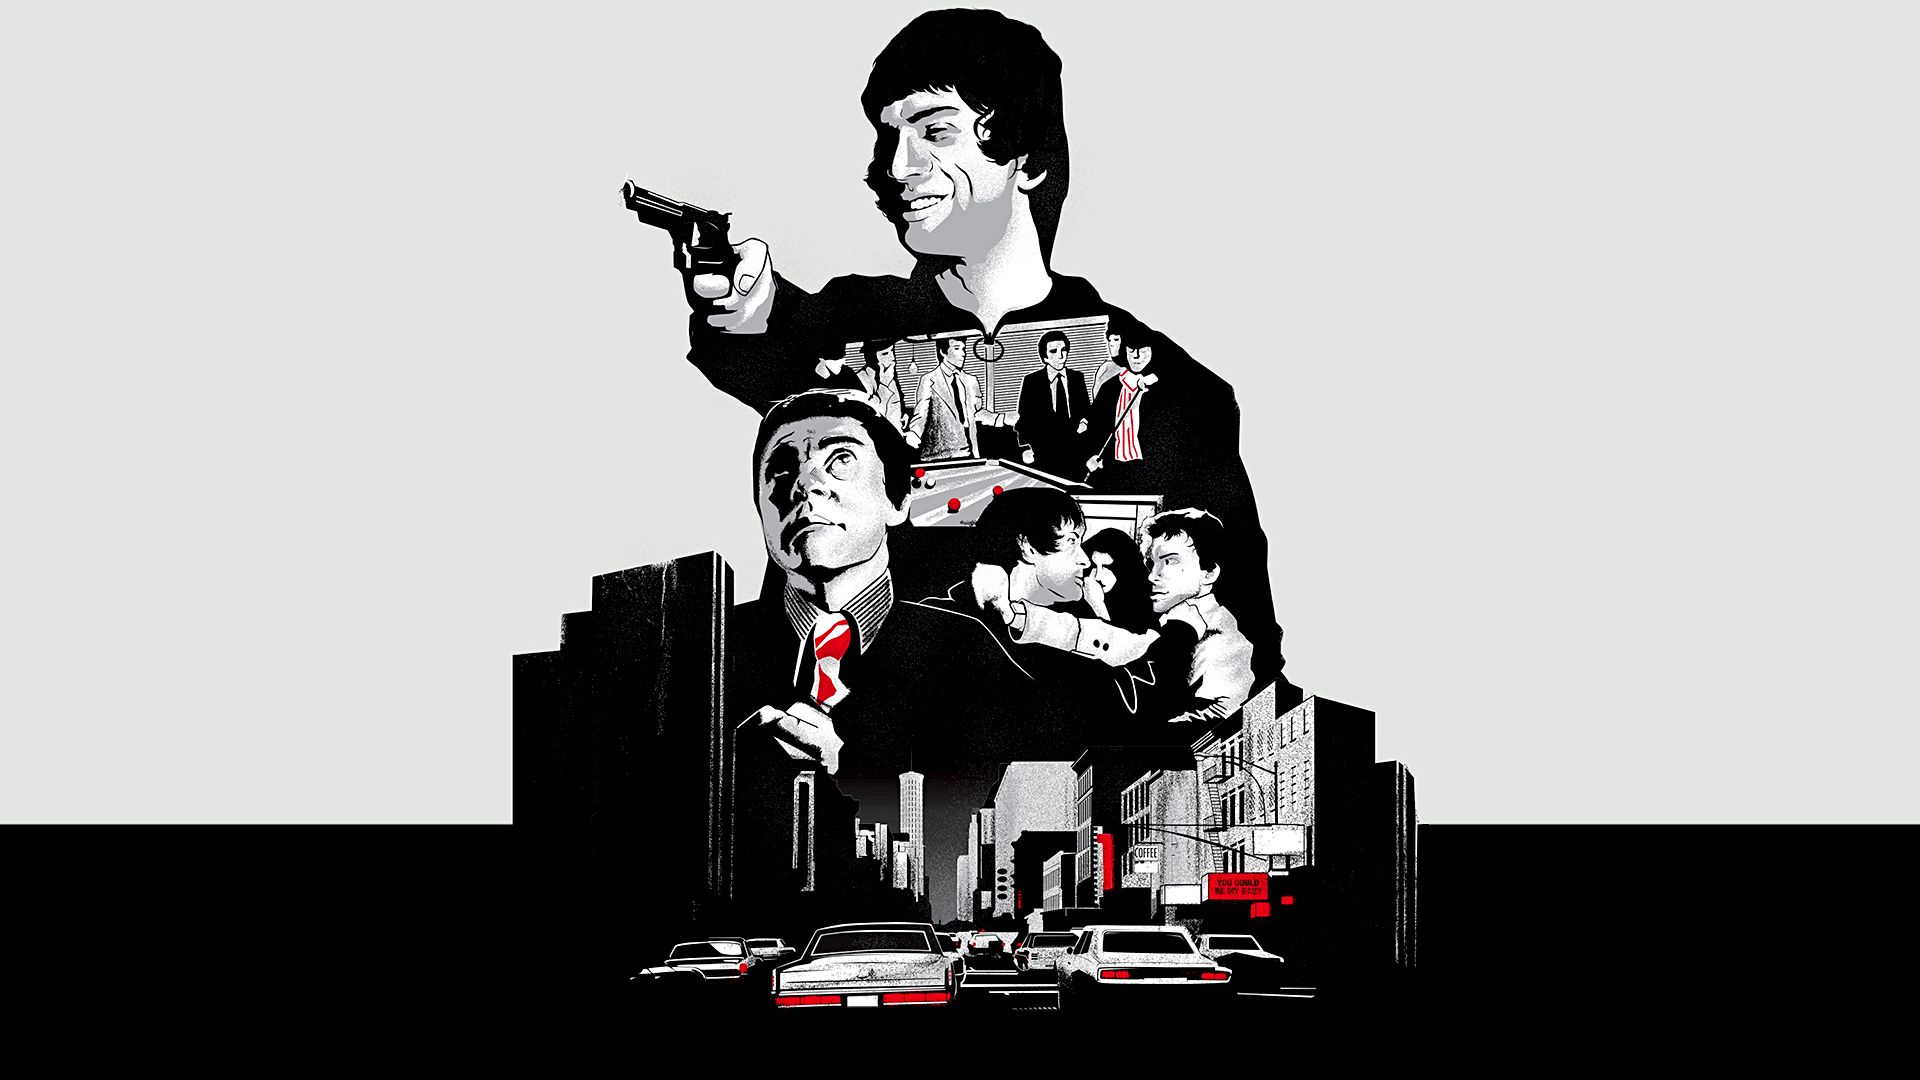 Mean Streets background